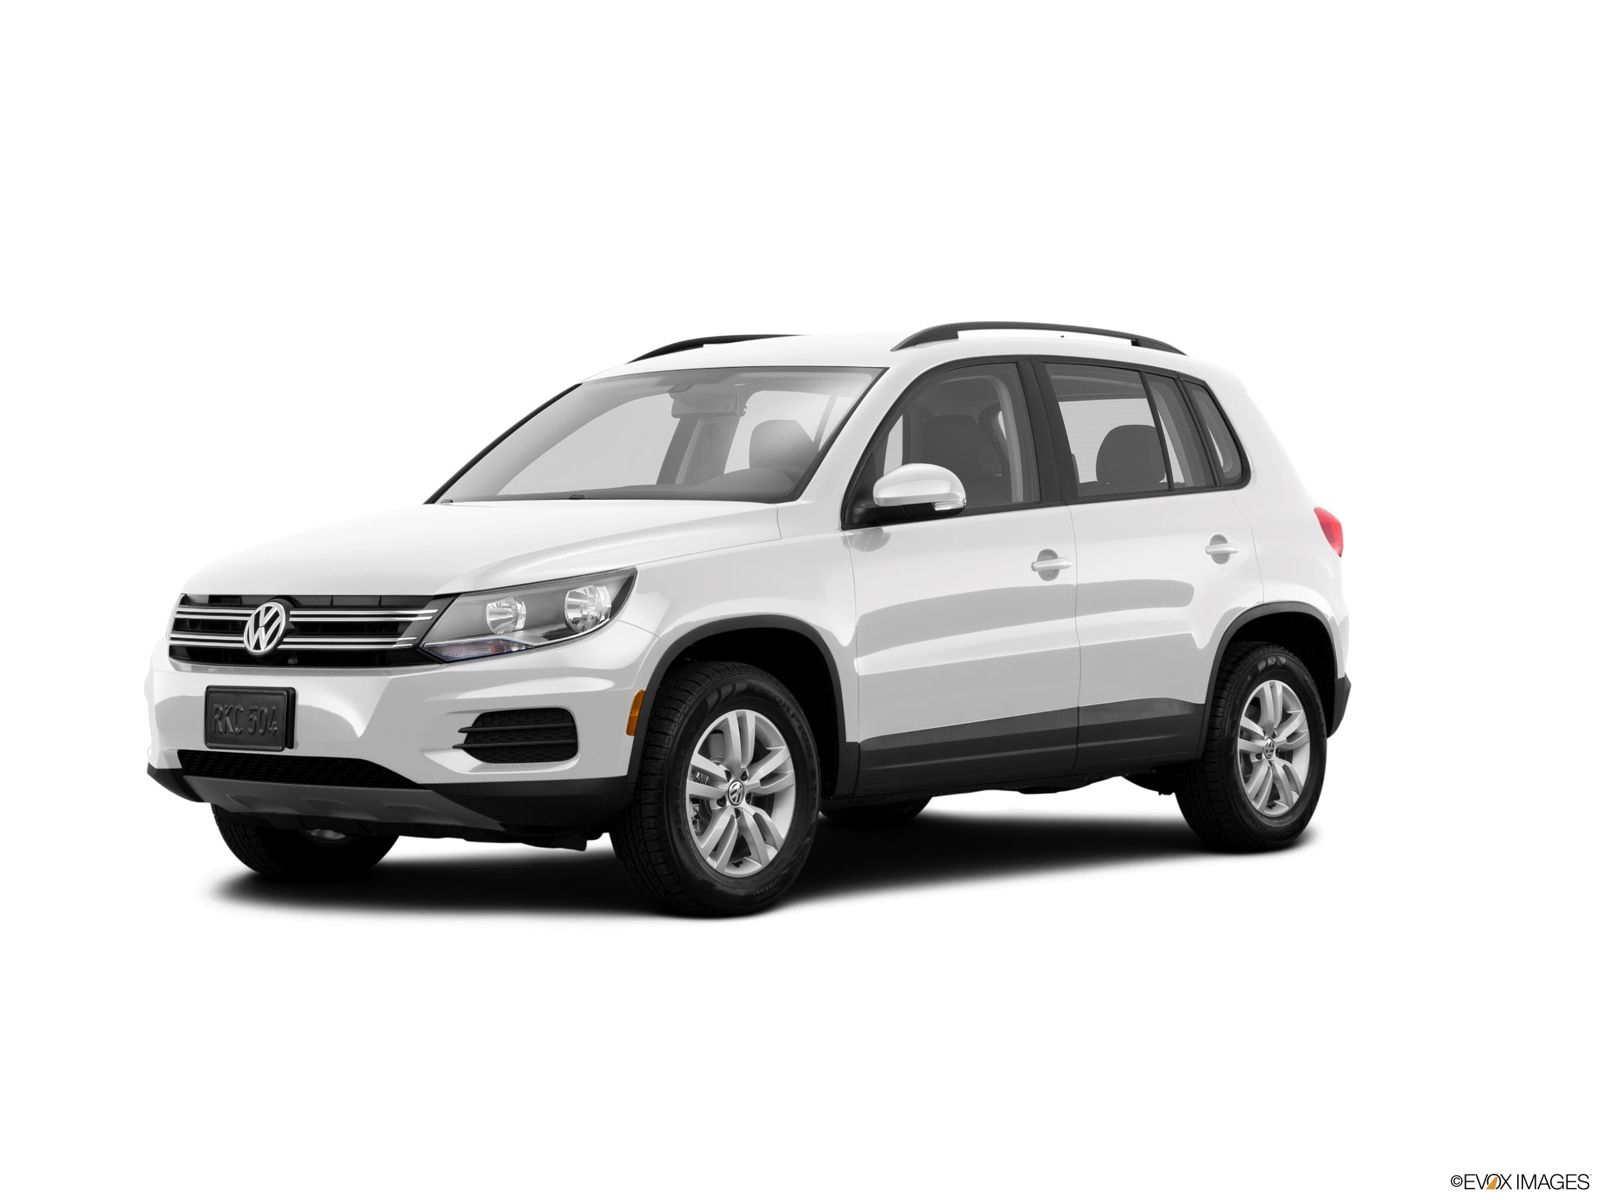 2016 Volkswagen Tiguan Research, photos, specs, and expertise | CarMax